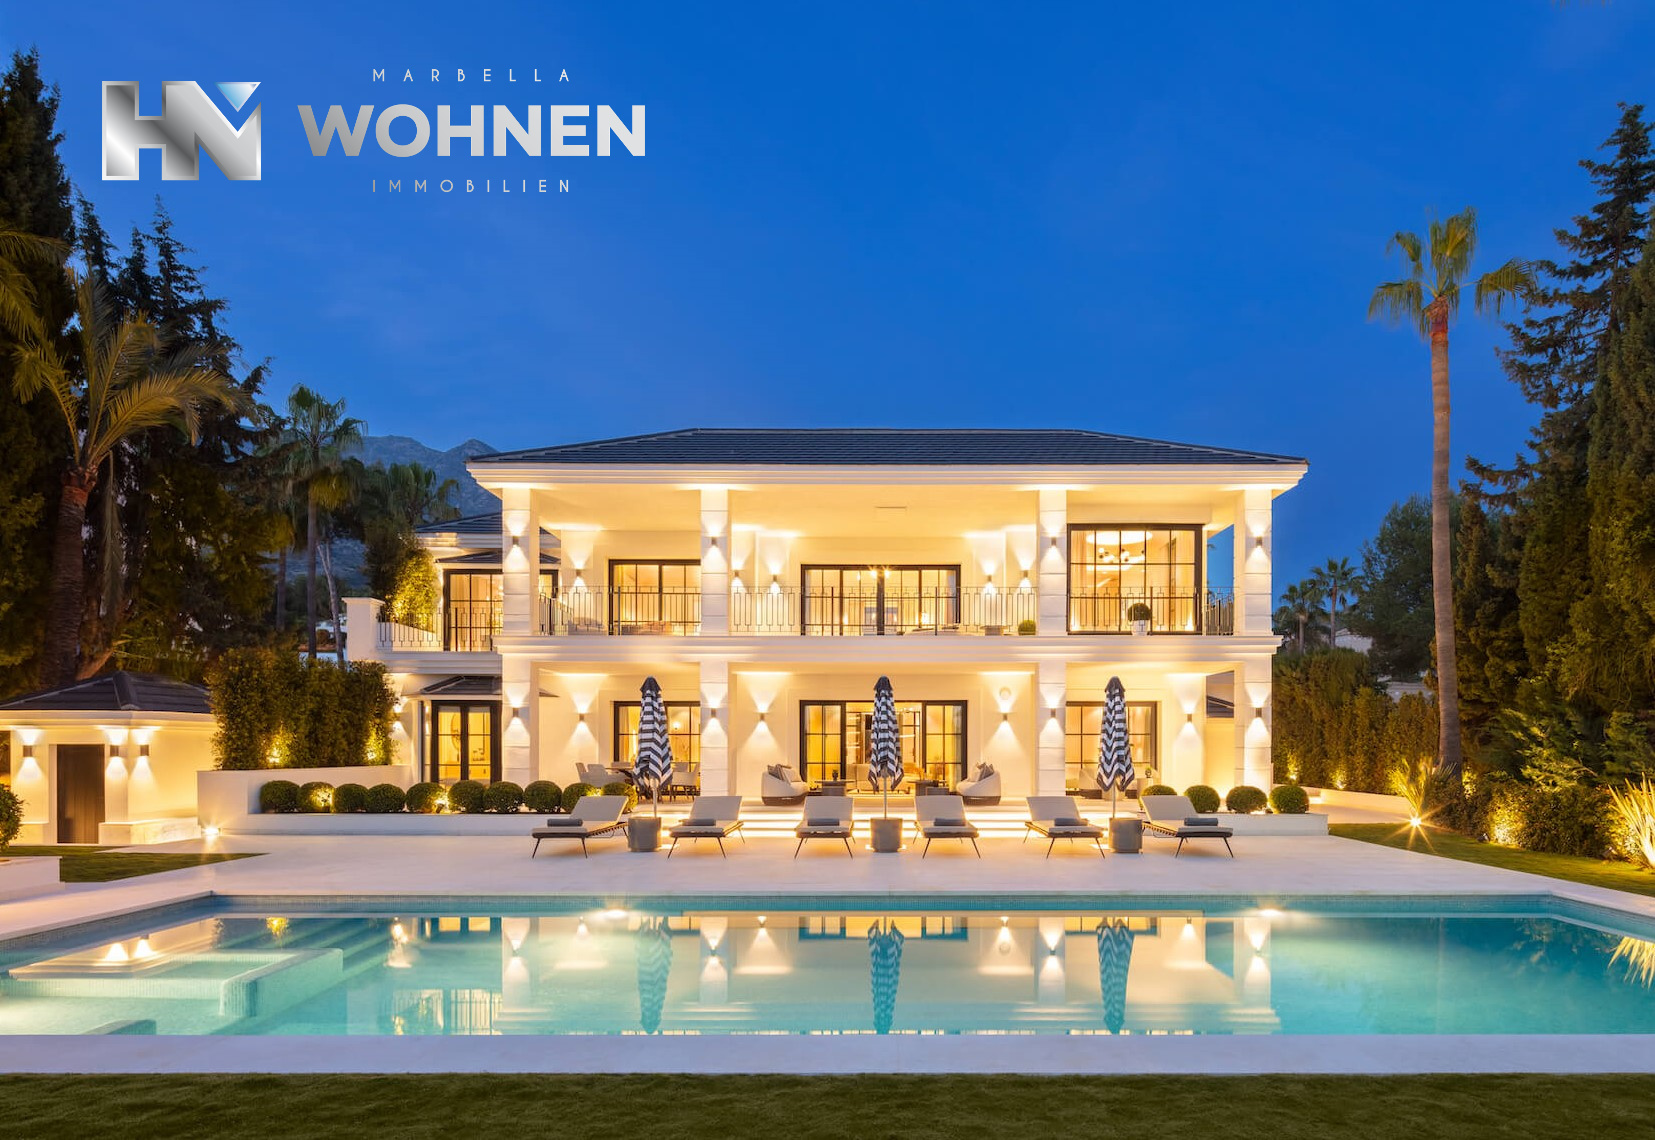 REAL ESTATE – MARBELLA WOHNEN – Property of the month April 2024 – Luxury villa with panoramic views of the Mediterranean in Sierra Blanca, Marbella’s famous “Golden Mile”